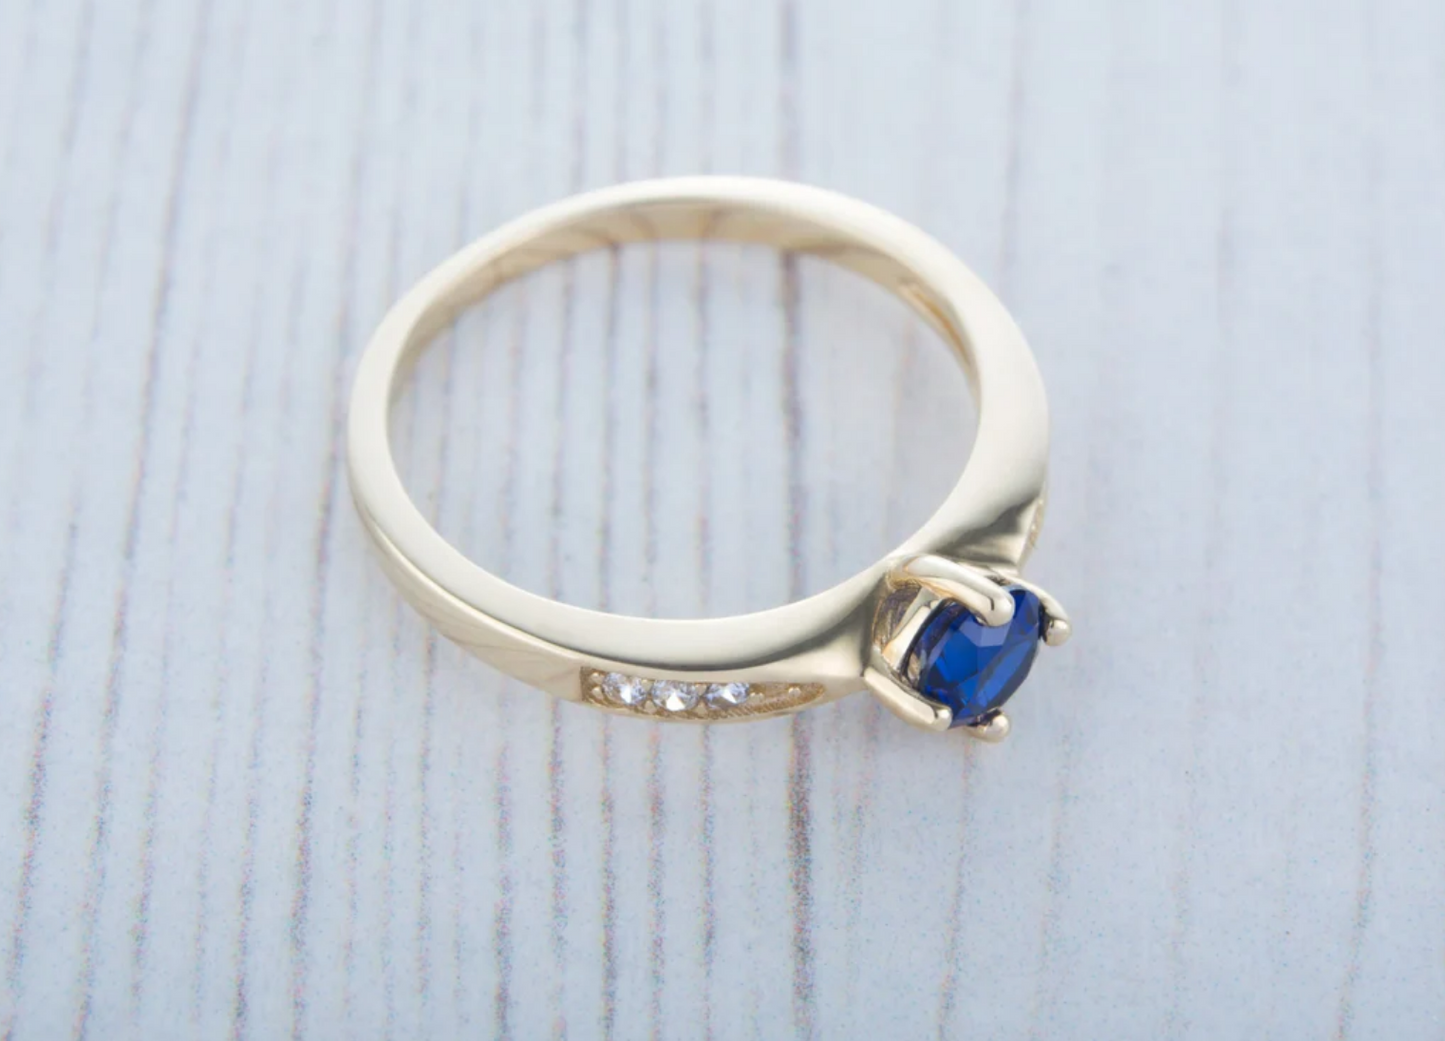 Size UK O / US 7 10K Solid Yellow Gold and Natural blue sapphire Engagement ring.